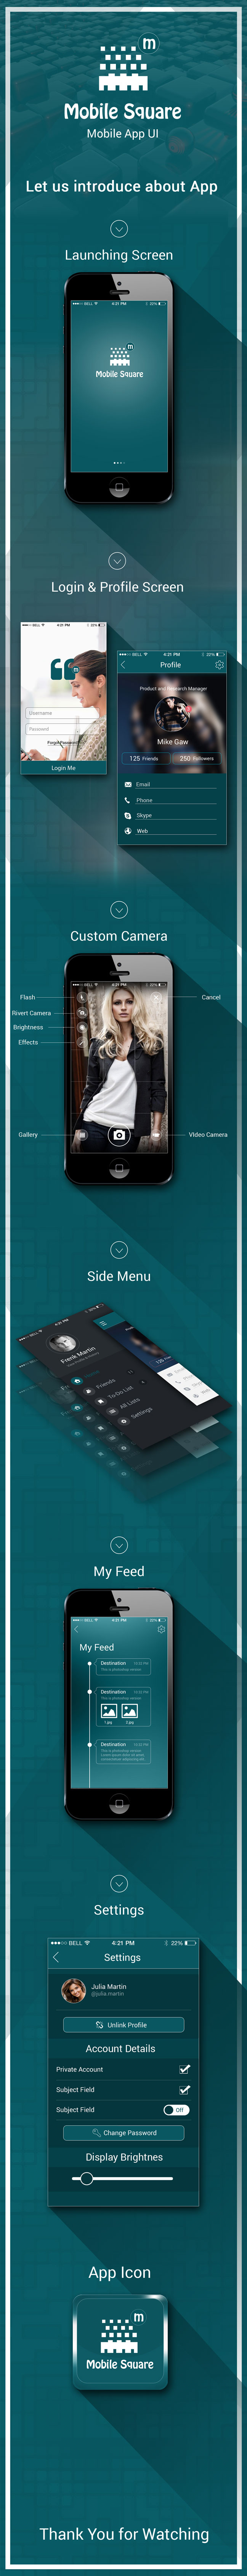 Mobile app UI app iphone android application ios7 iPad psd